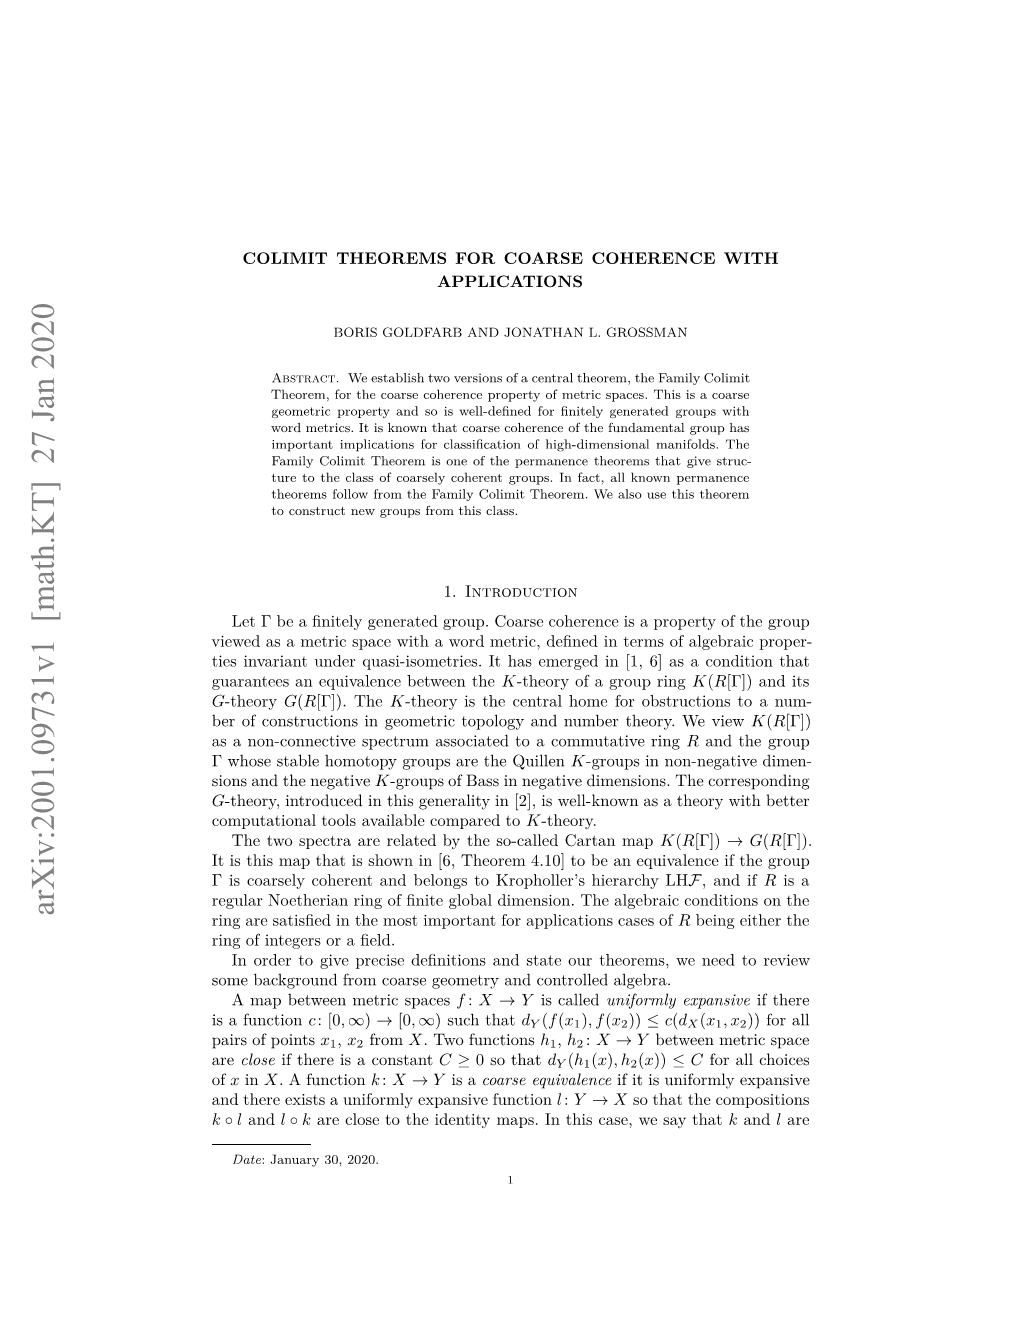 Colimit Theorems for Coarse Coherence with Applications